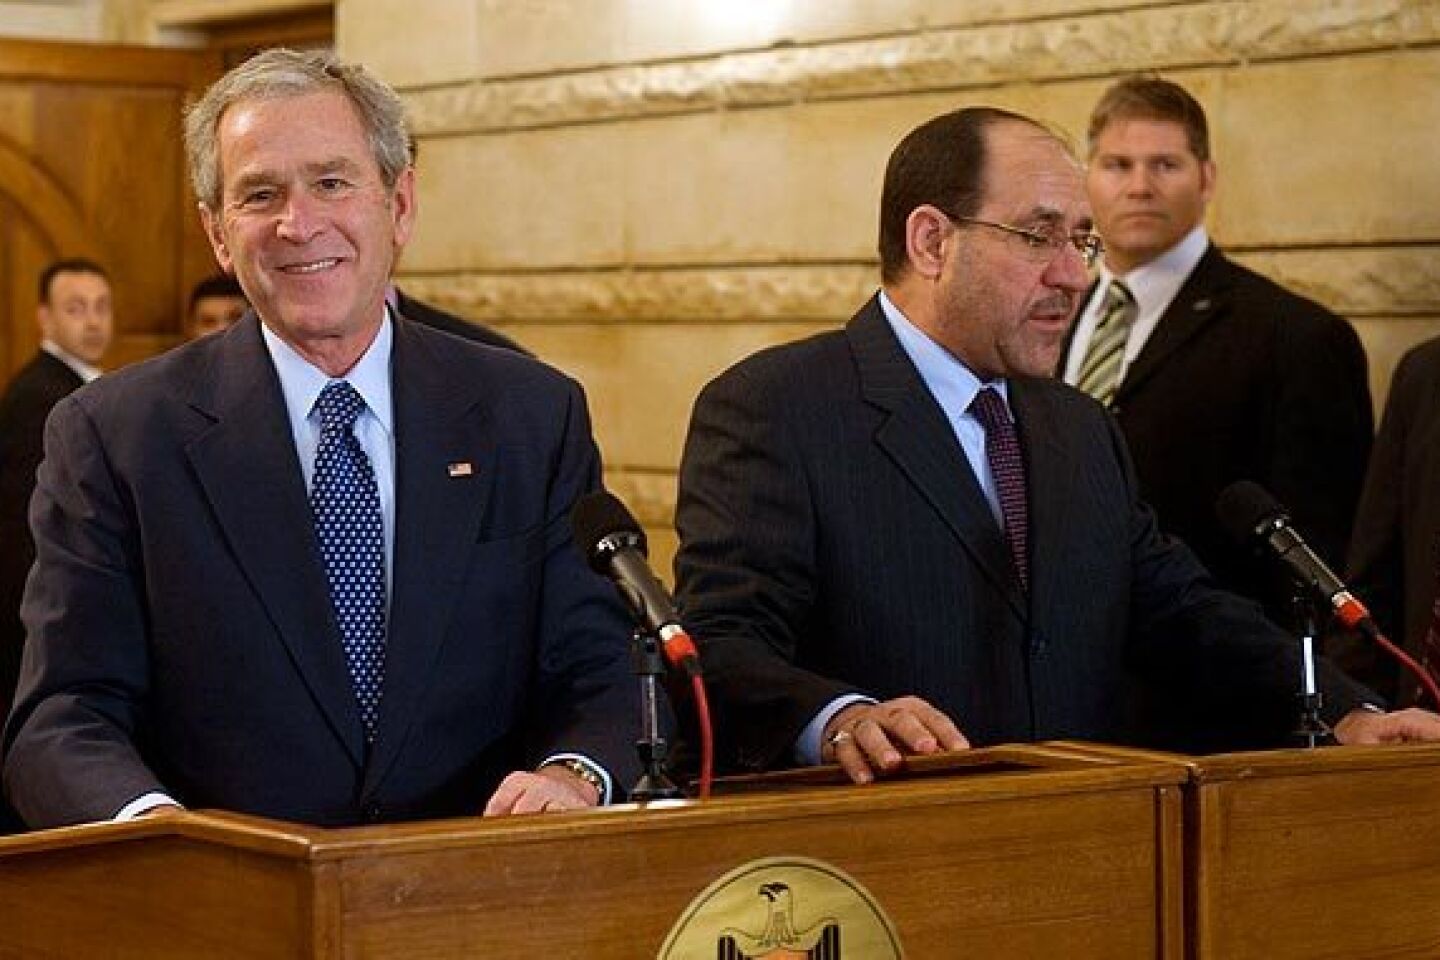 President Bush, alongside Iraq Prime Minister Nouri Maliki, is apparently unruffled and has a smile for reporters after ducking two thrown shoes at a news conference.